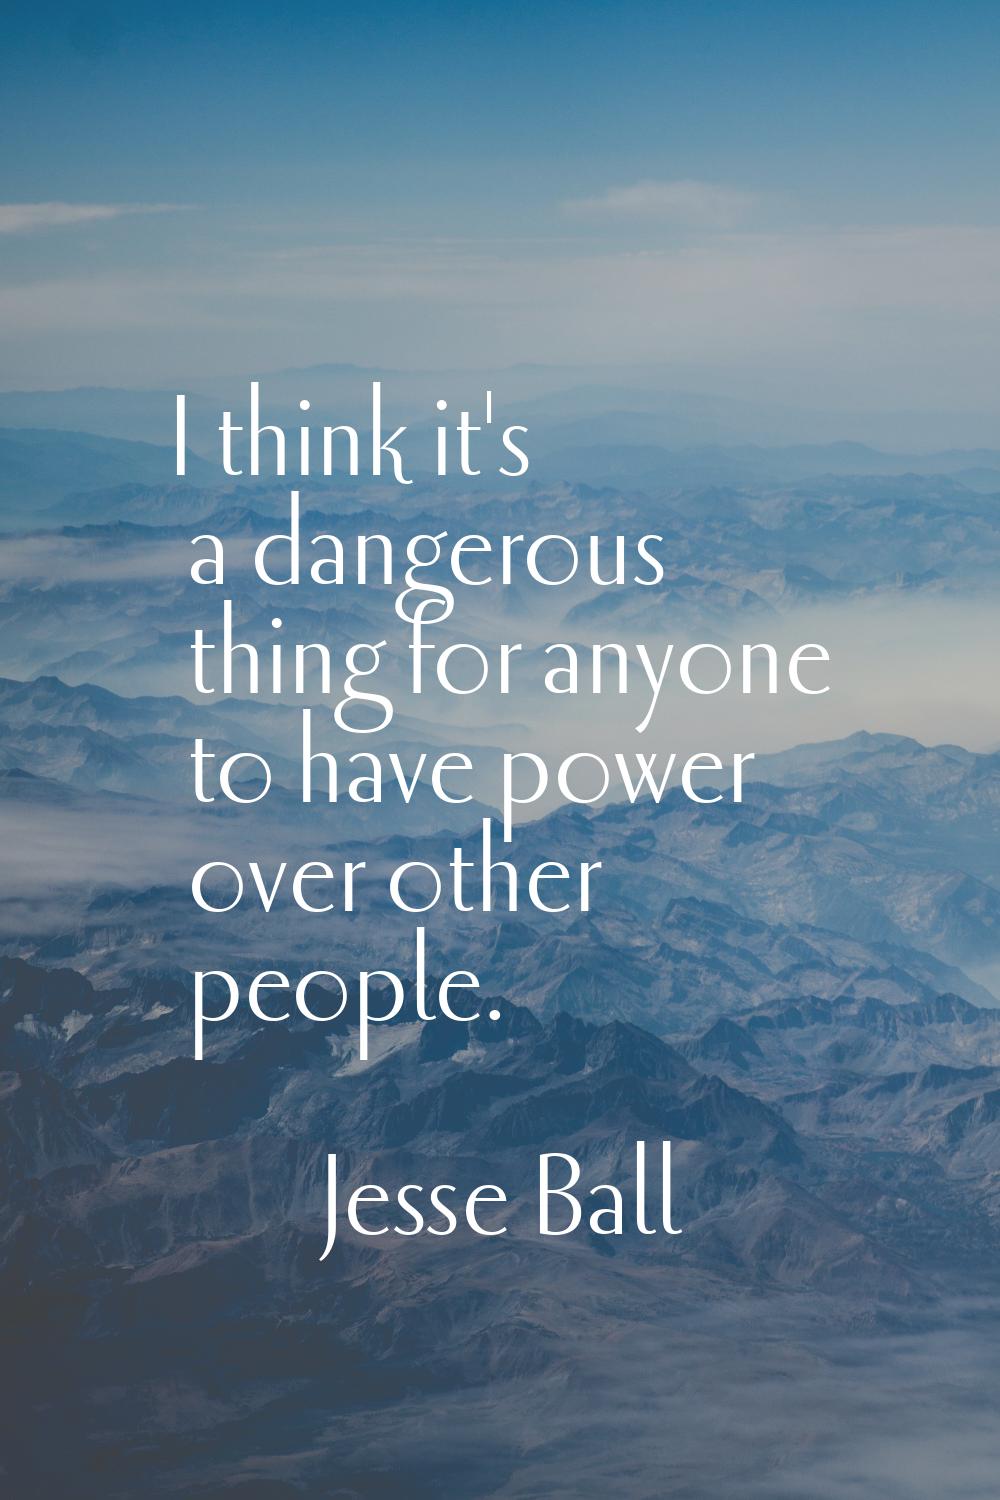 I think it's a dangerous thing for anyone to have power over other people.